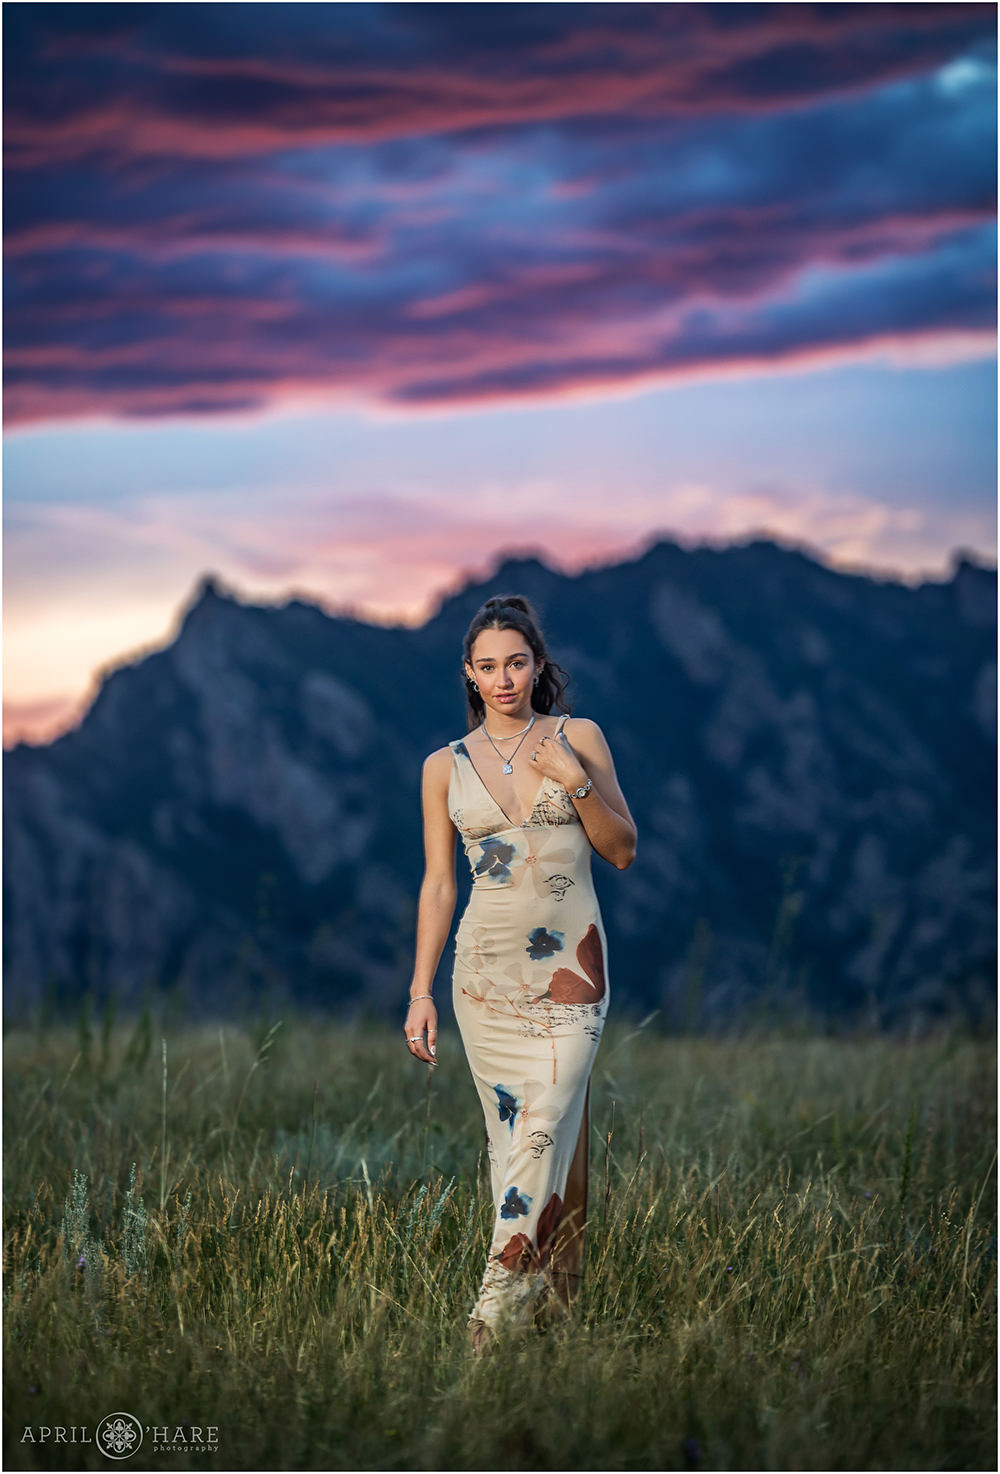 Beautiful sunset mountain backdrop for a senior portrait at the Flatirons Vista Trail in Boulder CO